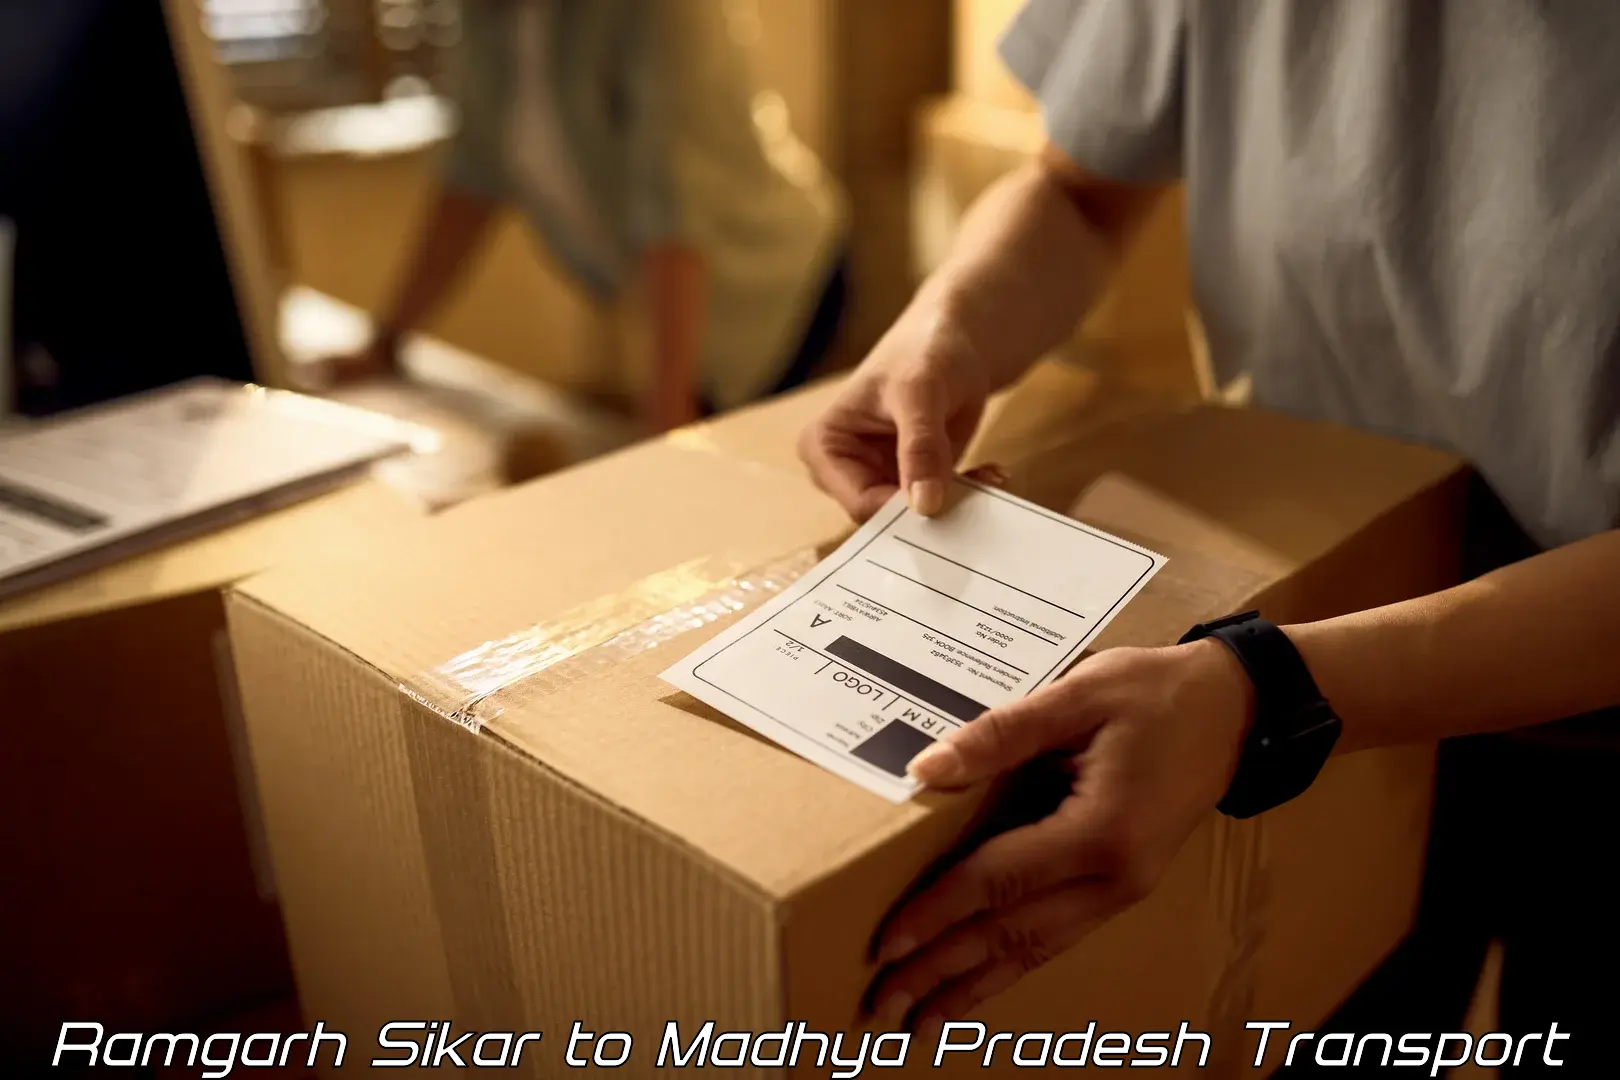 Daily parcel service transport Ramgarh Sikar to Khargone